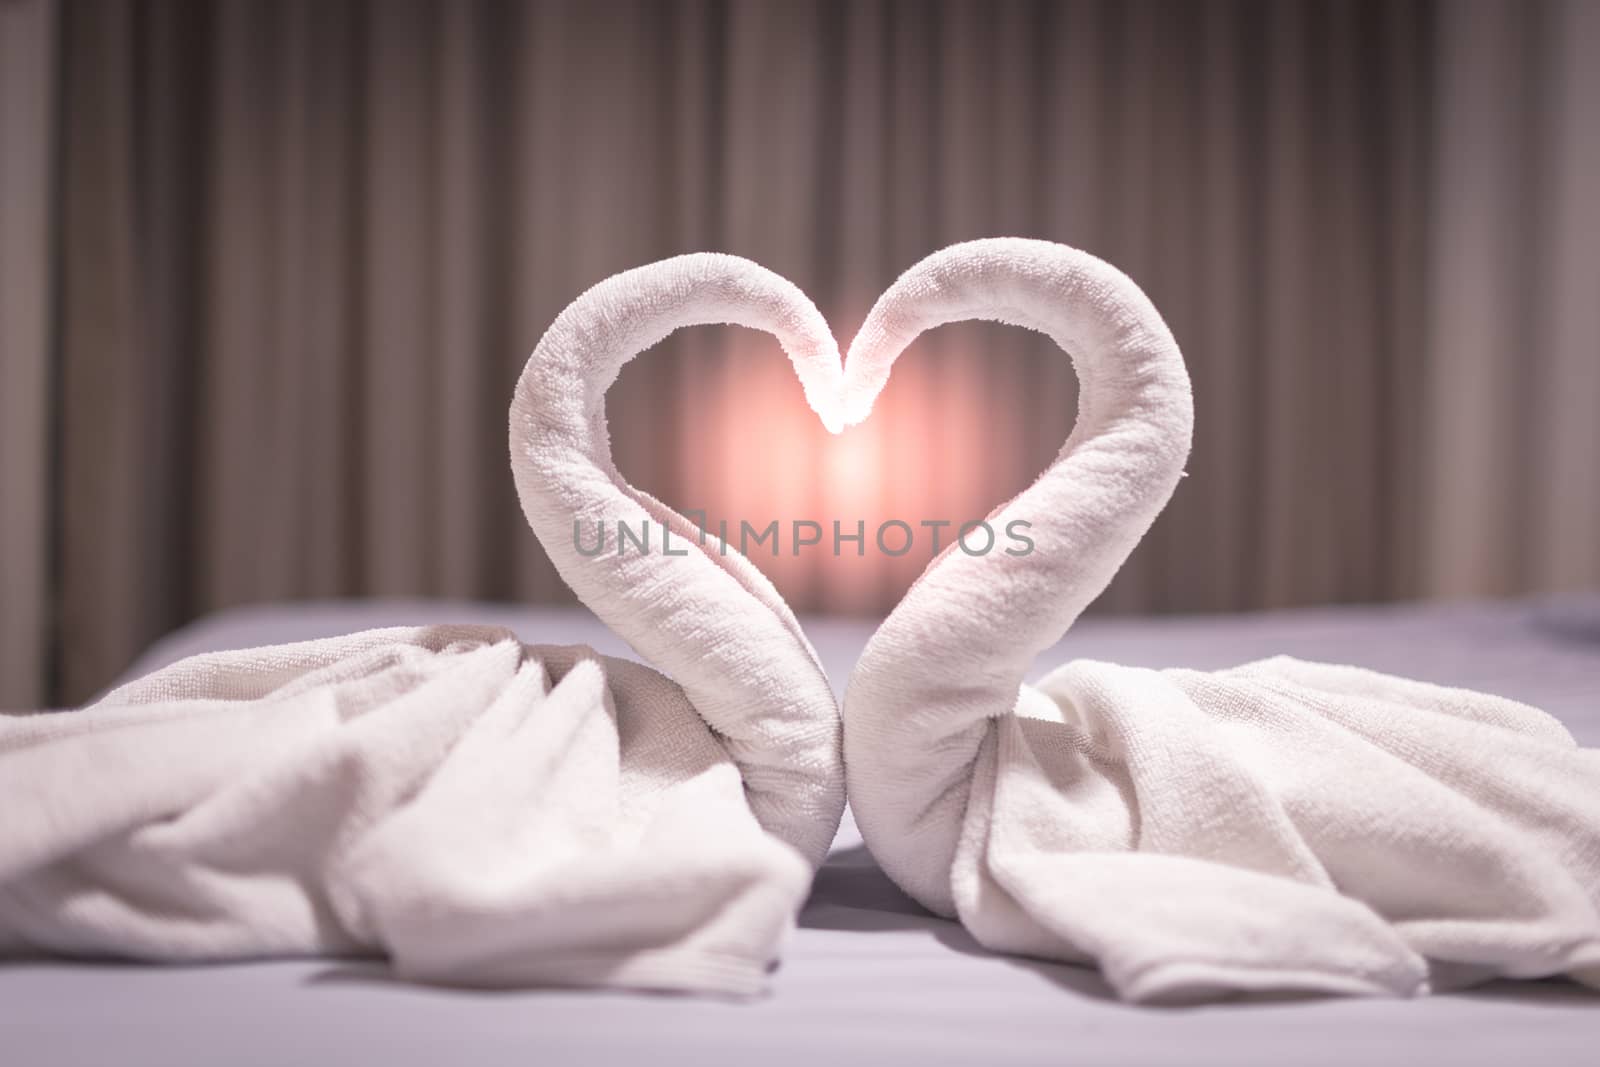 Towel is made of a white swan in the bed detail art blur